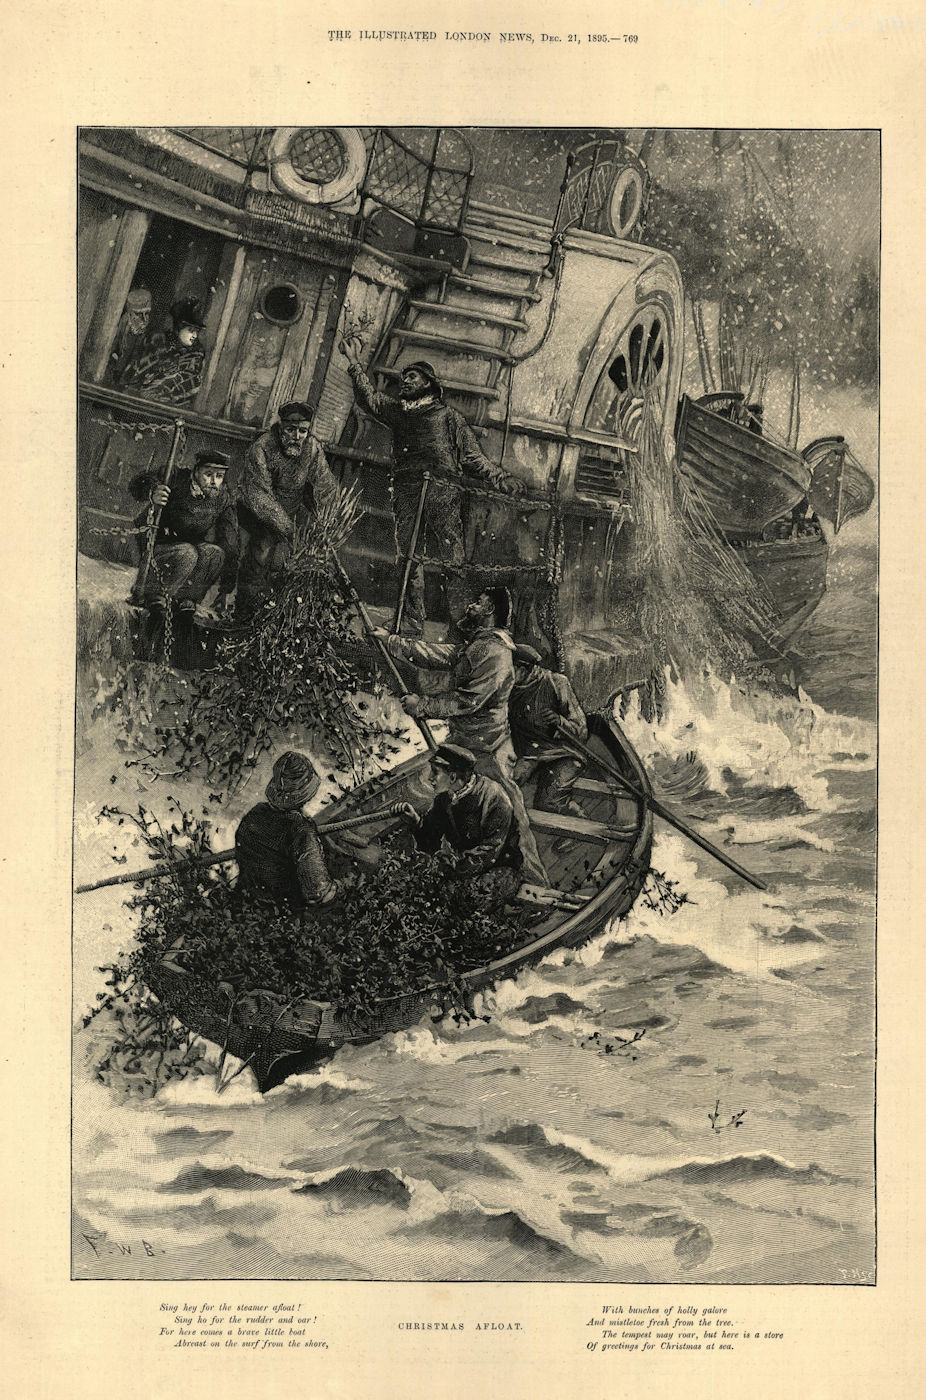 Christmas at sea " Sing hey for the steamer afloat ". Holly & mistletoe 1895